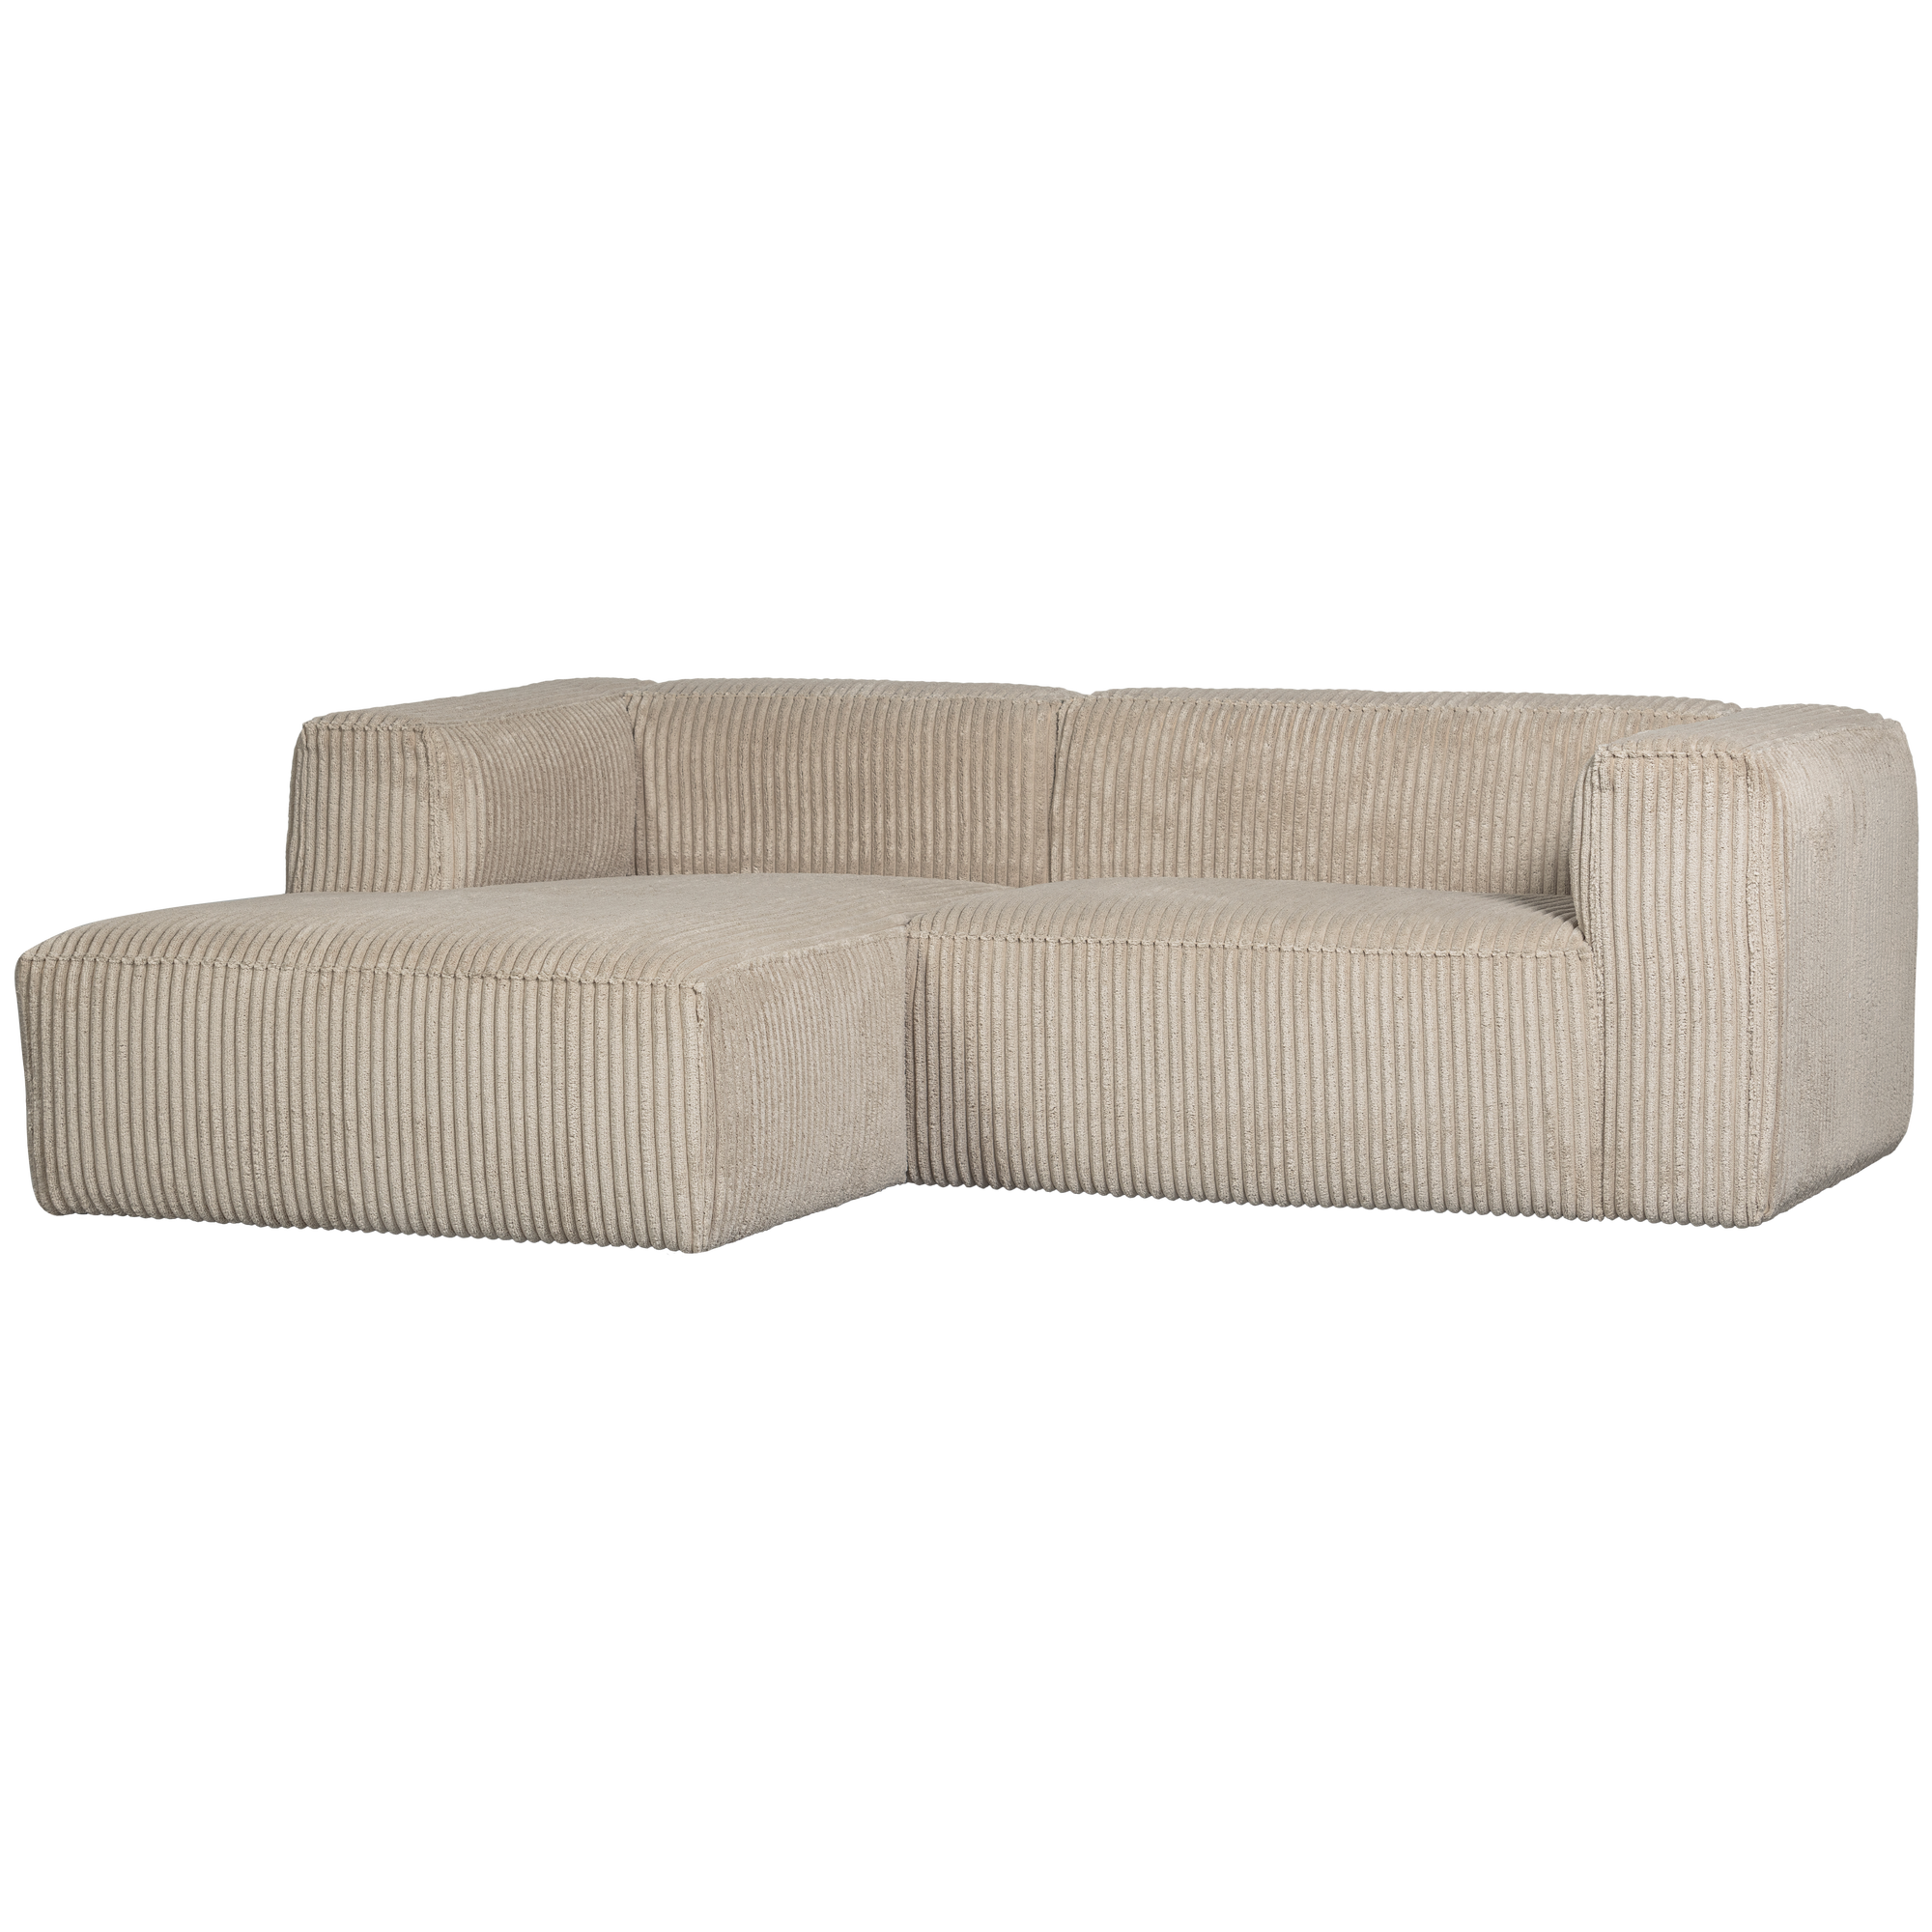 377432-RR-02_VS_WE_Bean_chaise_longue_links_grove_ribstof_travertin_SA.png?auto=webp&format=png&width=2000&height=2000